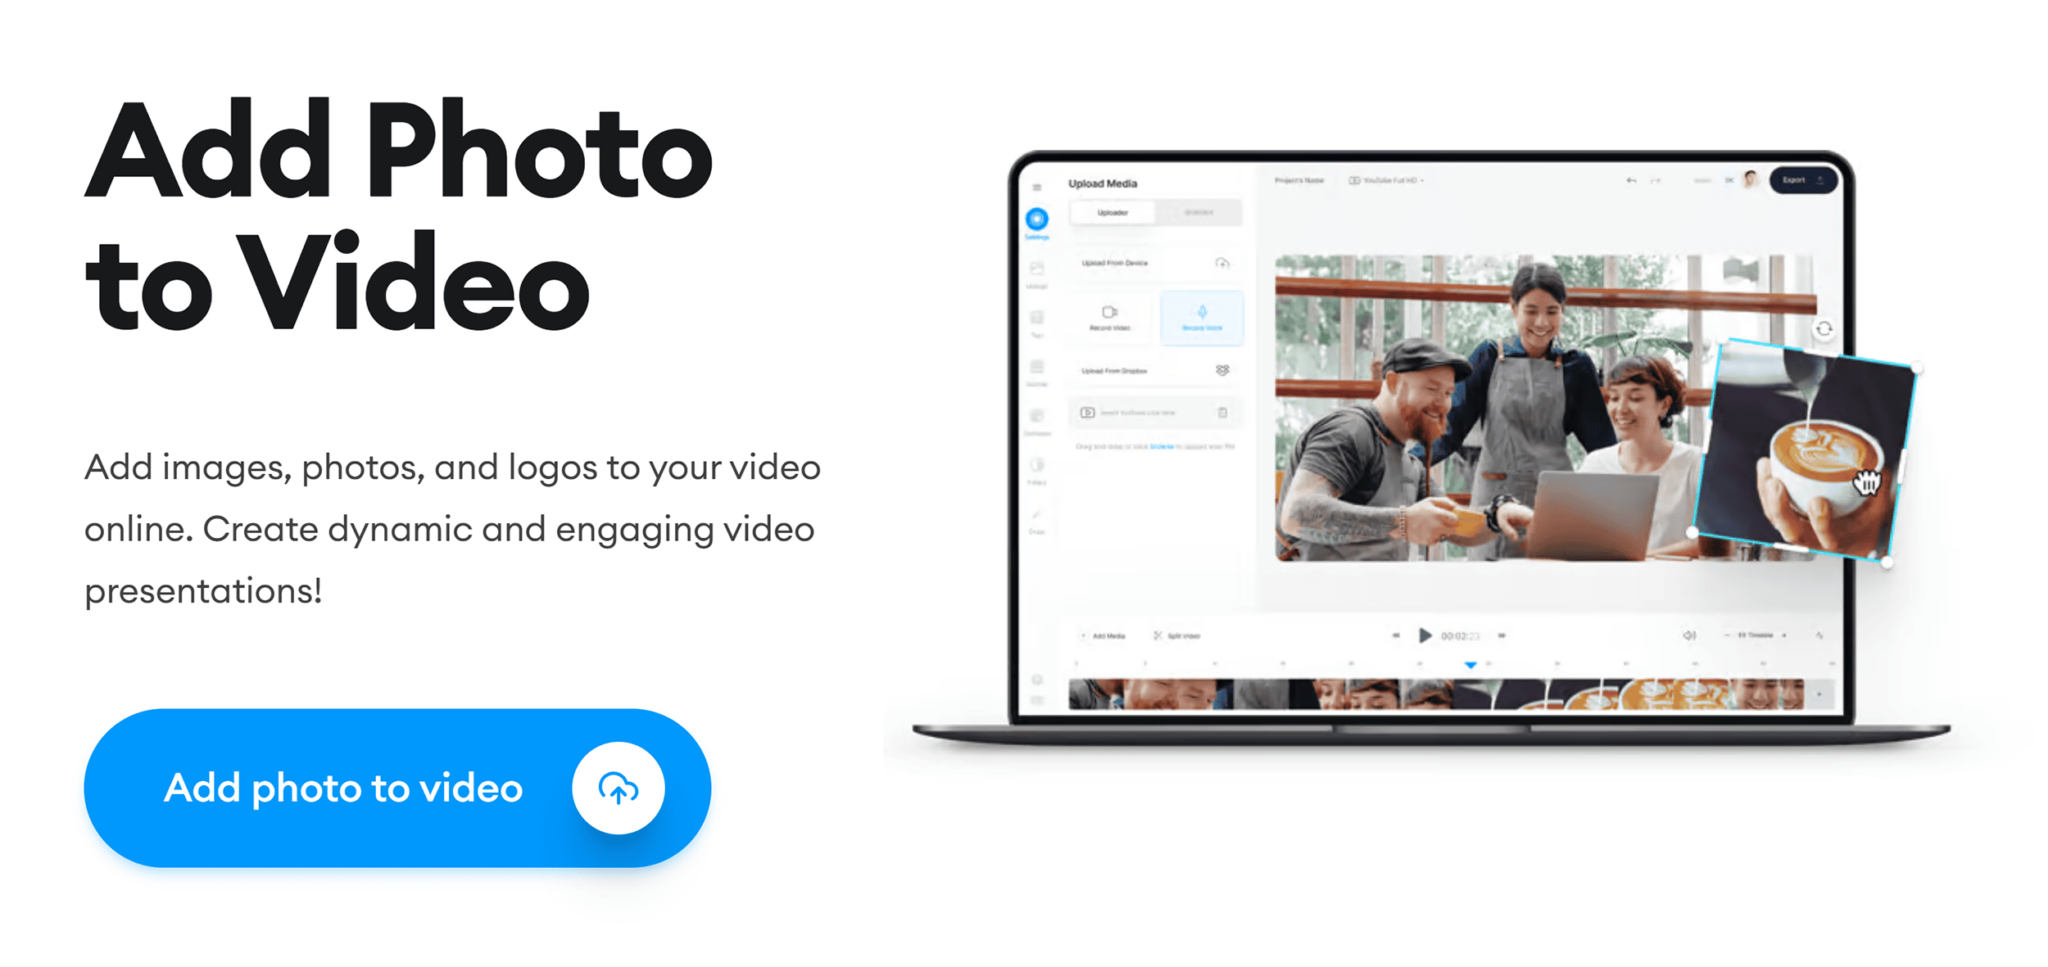 veed-io-add-photo-to-video 29 Top Digital Marketing Tools for Every Budget